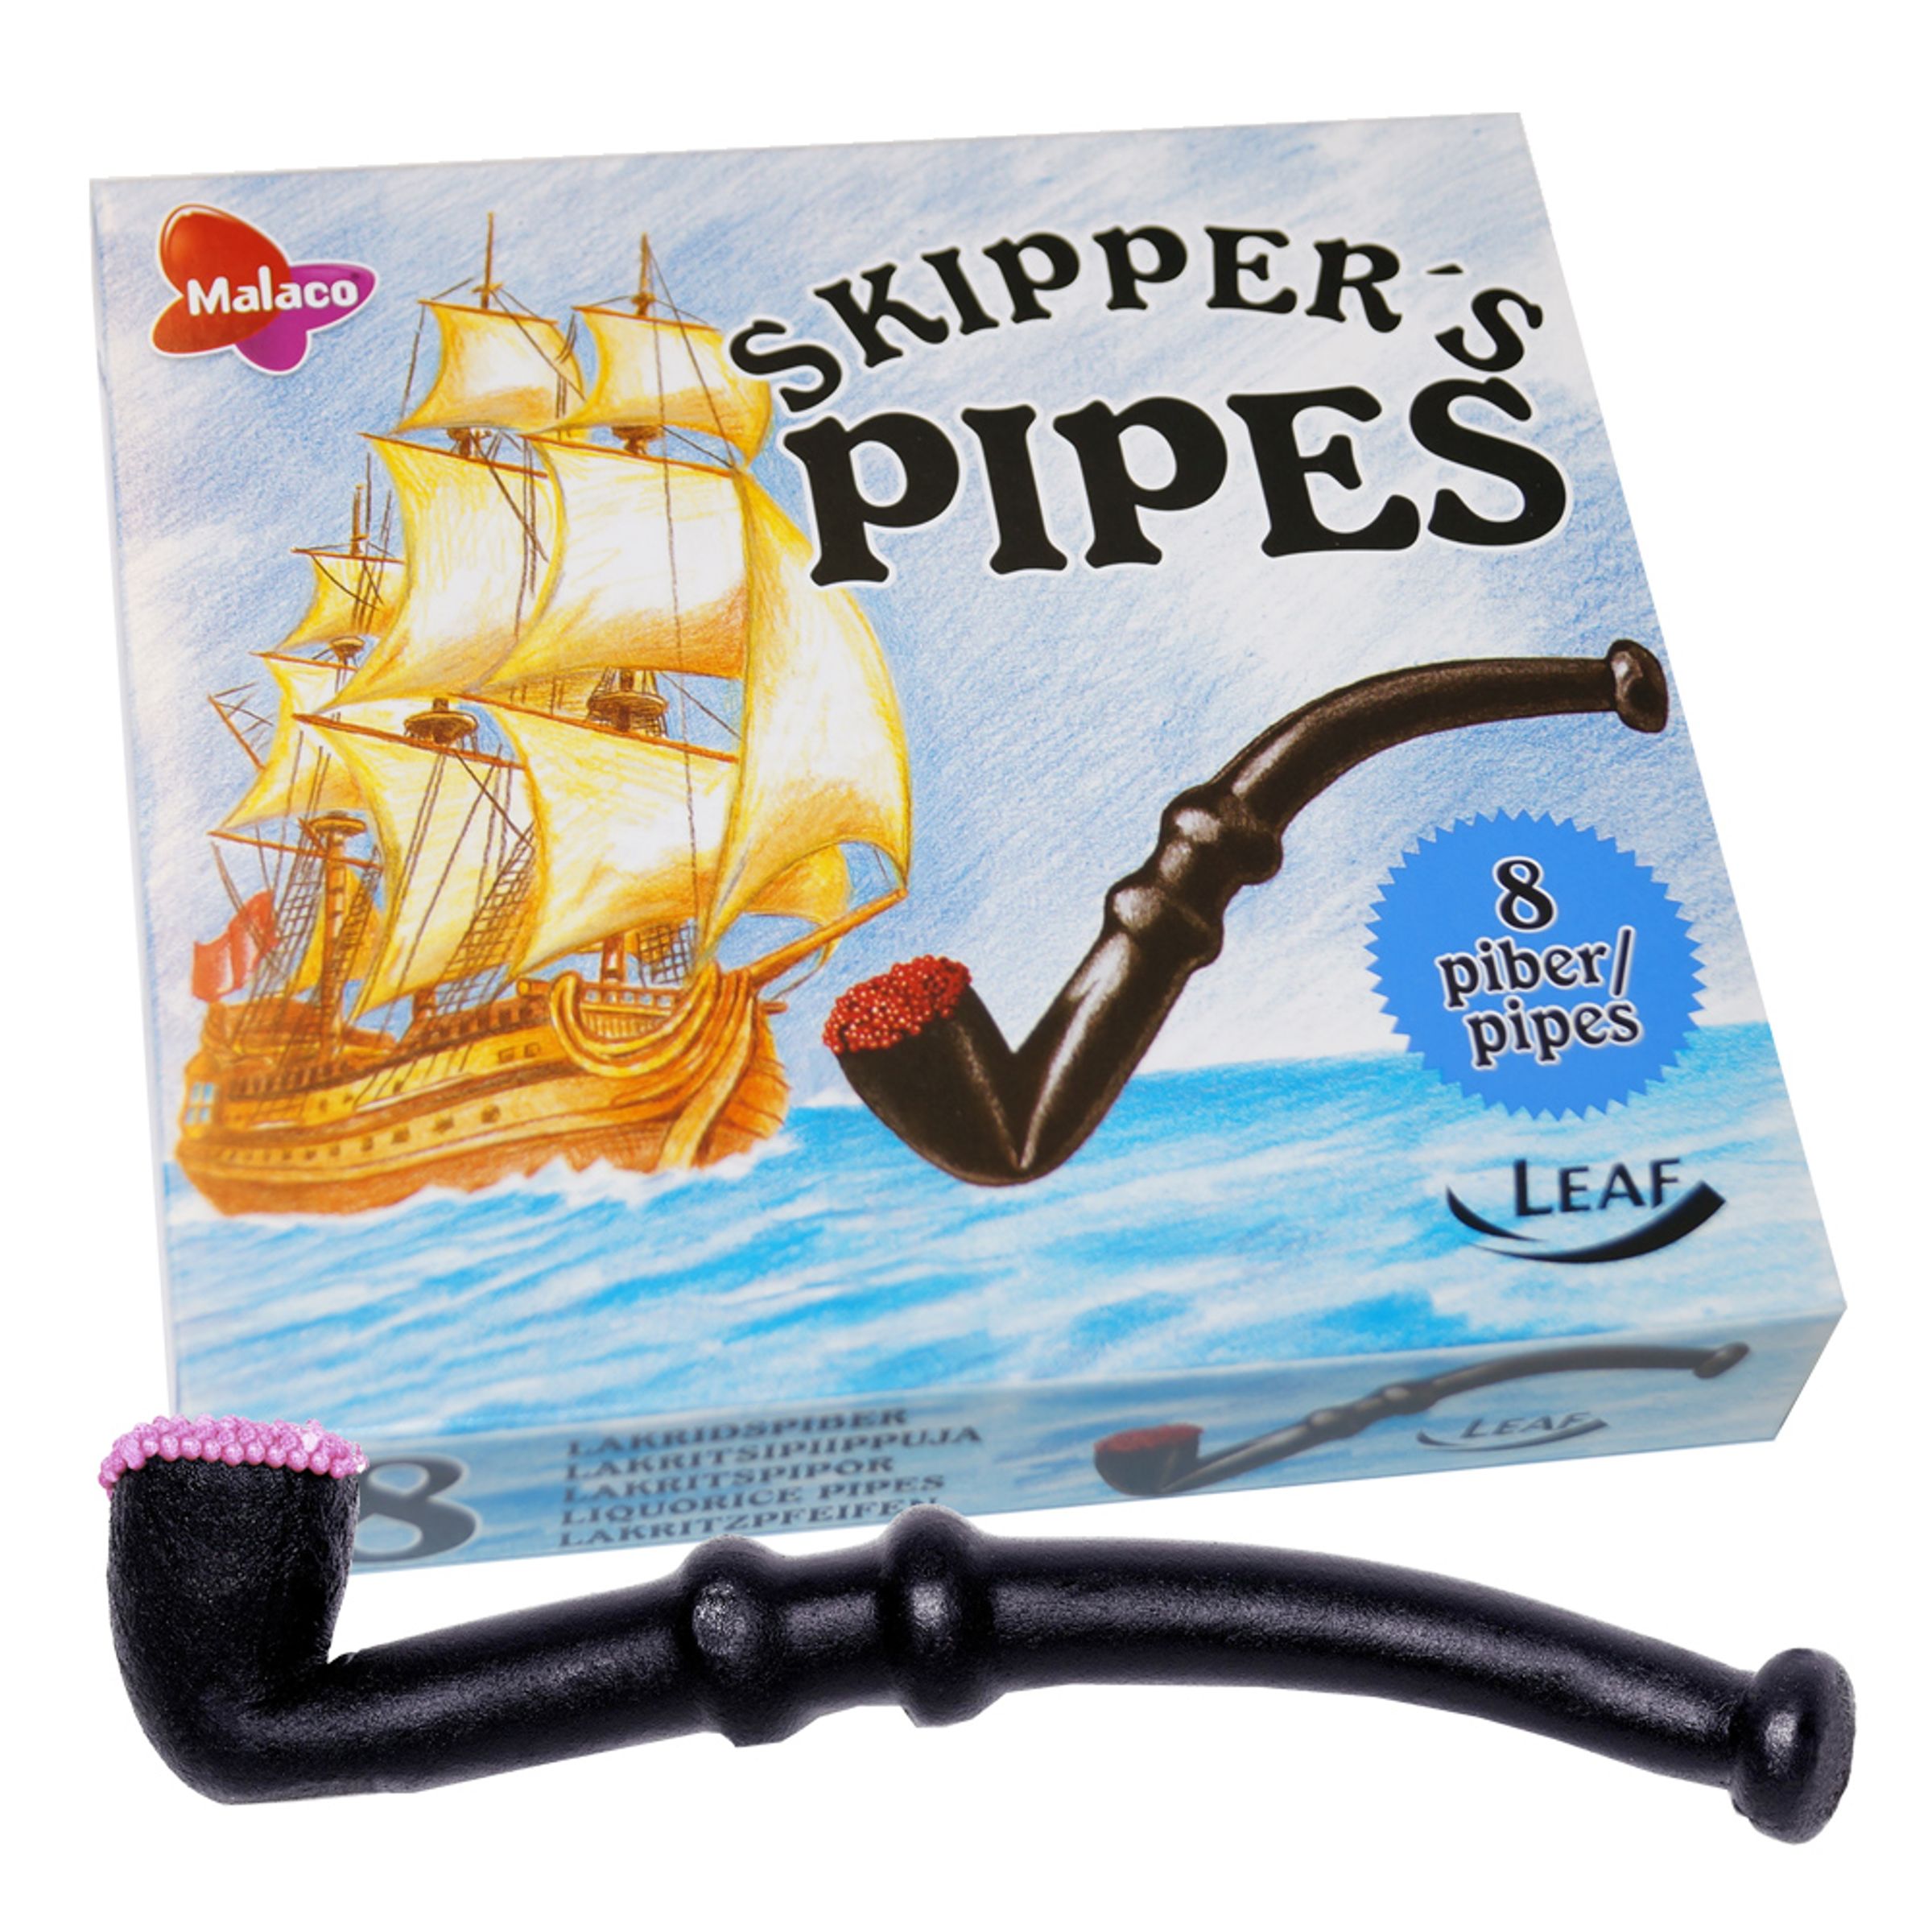 Skippers Pipes Lakritspipor - 8-pack